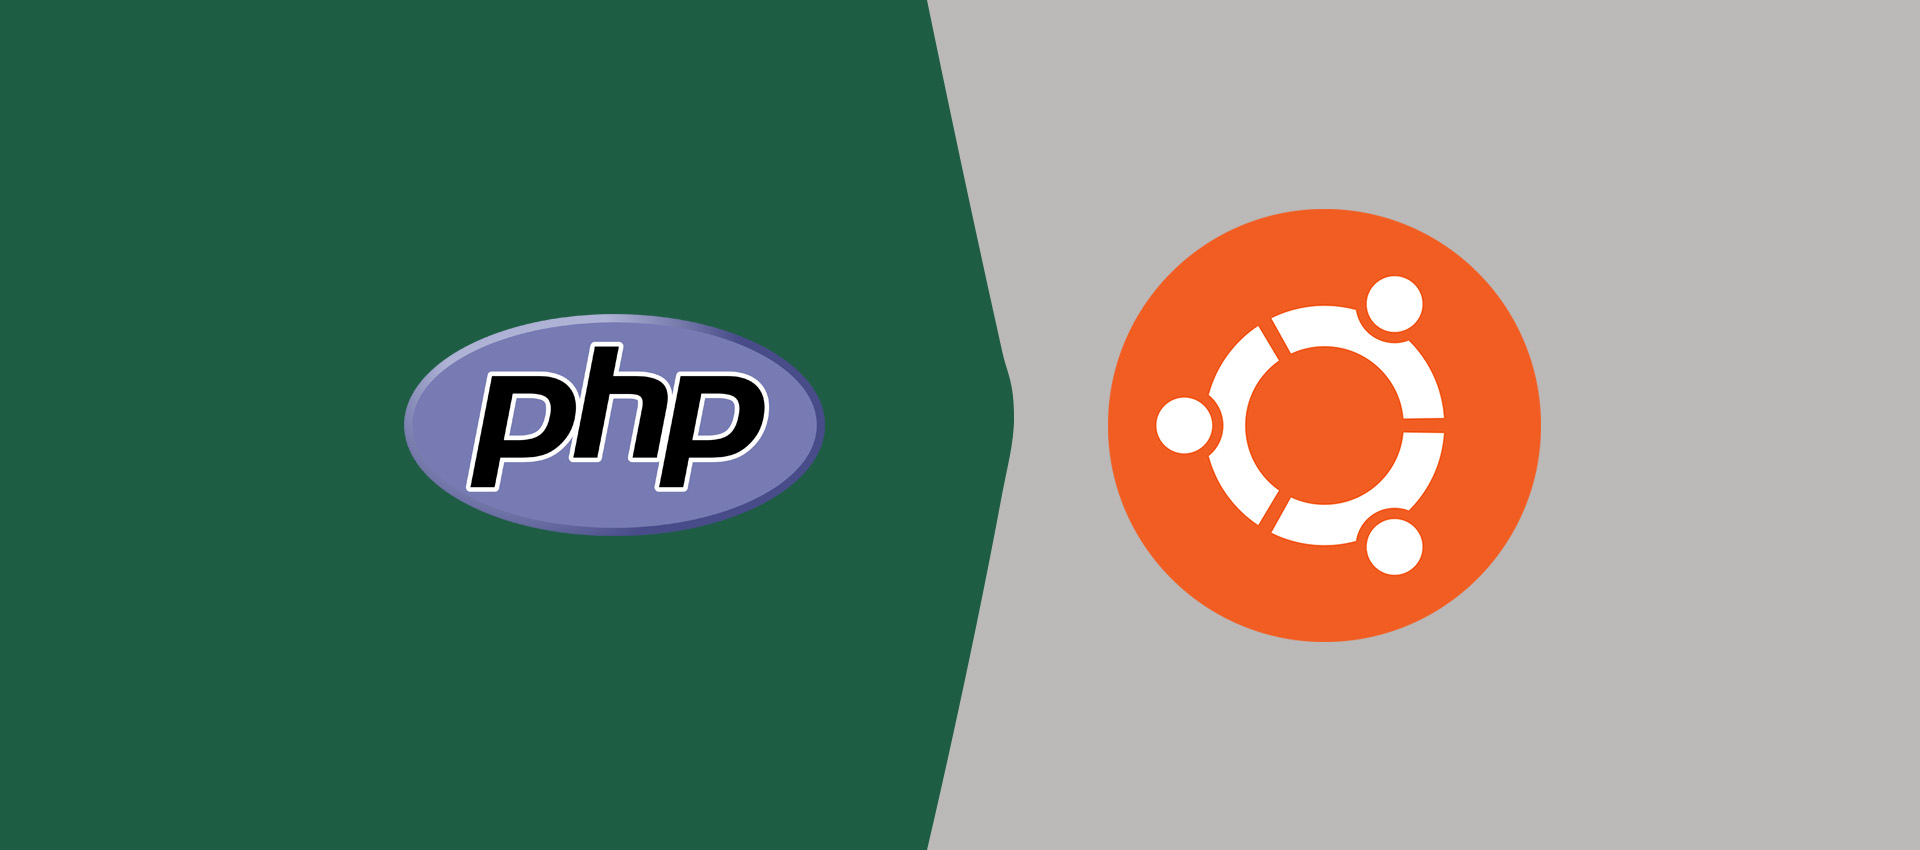 How To Install PHP 8 On Ubuntu 18.04 LTS